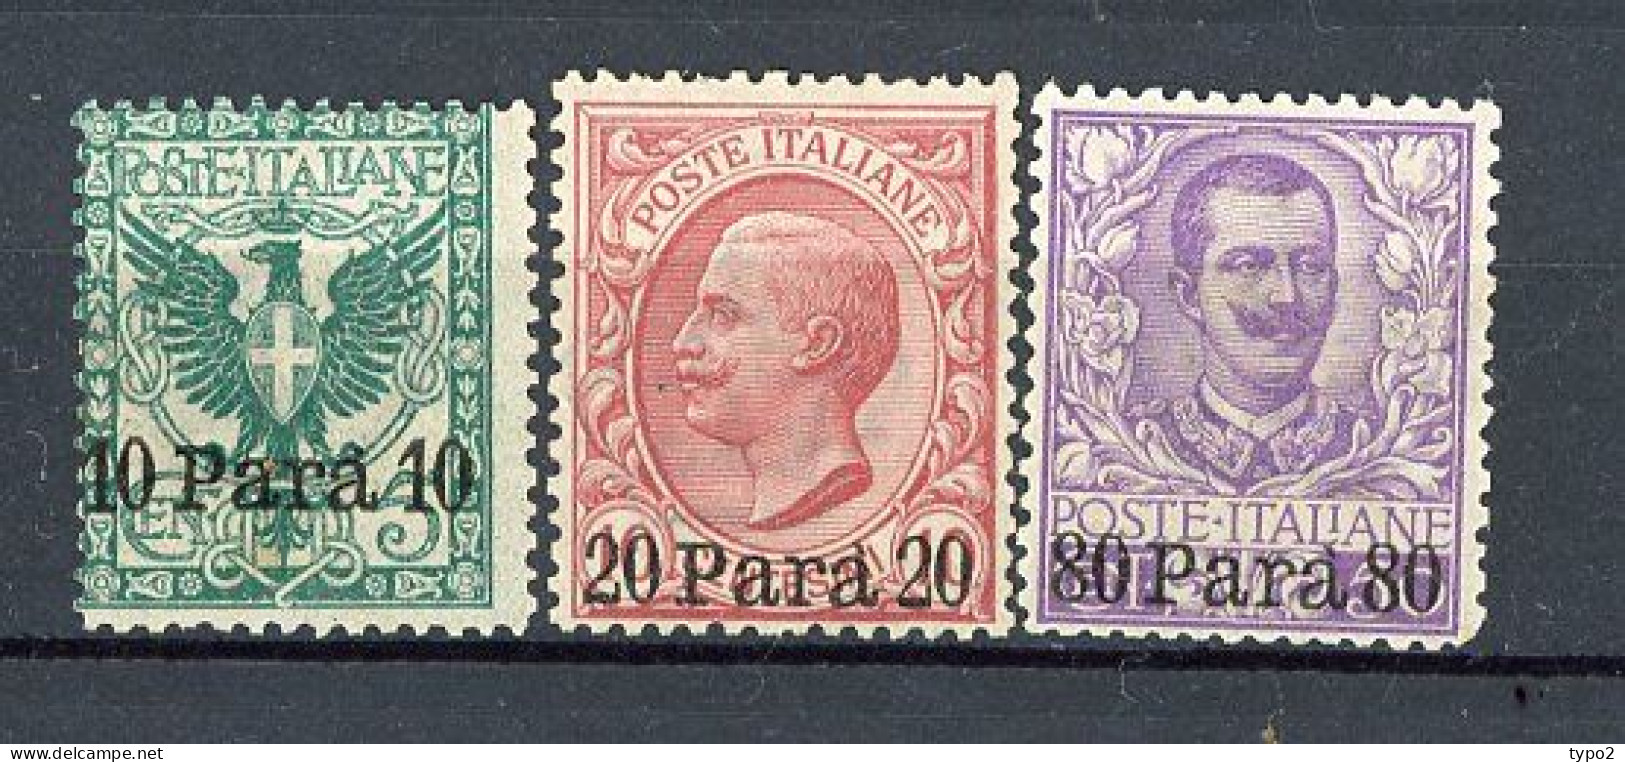 LEVANT  Yv. N° 21 à 23  SA N° 4,11,12  * 10pa S 5,,20pa S 10c,80pa S 50c  Cote 100  Euro BE  2 Scans - Albania